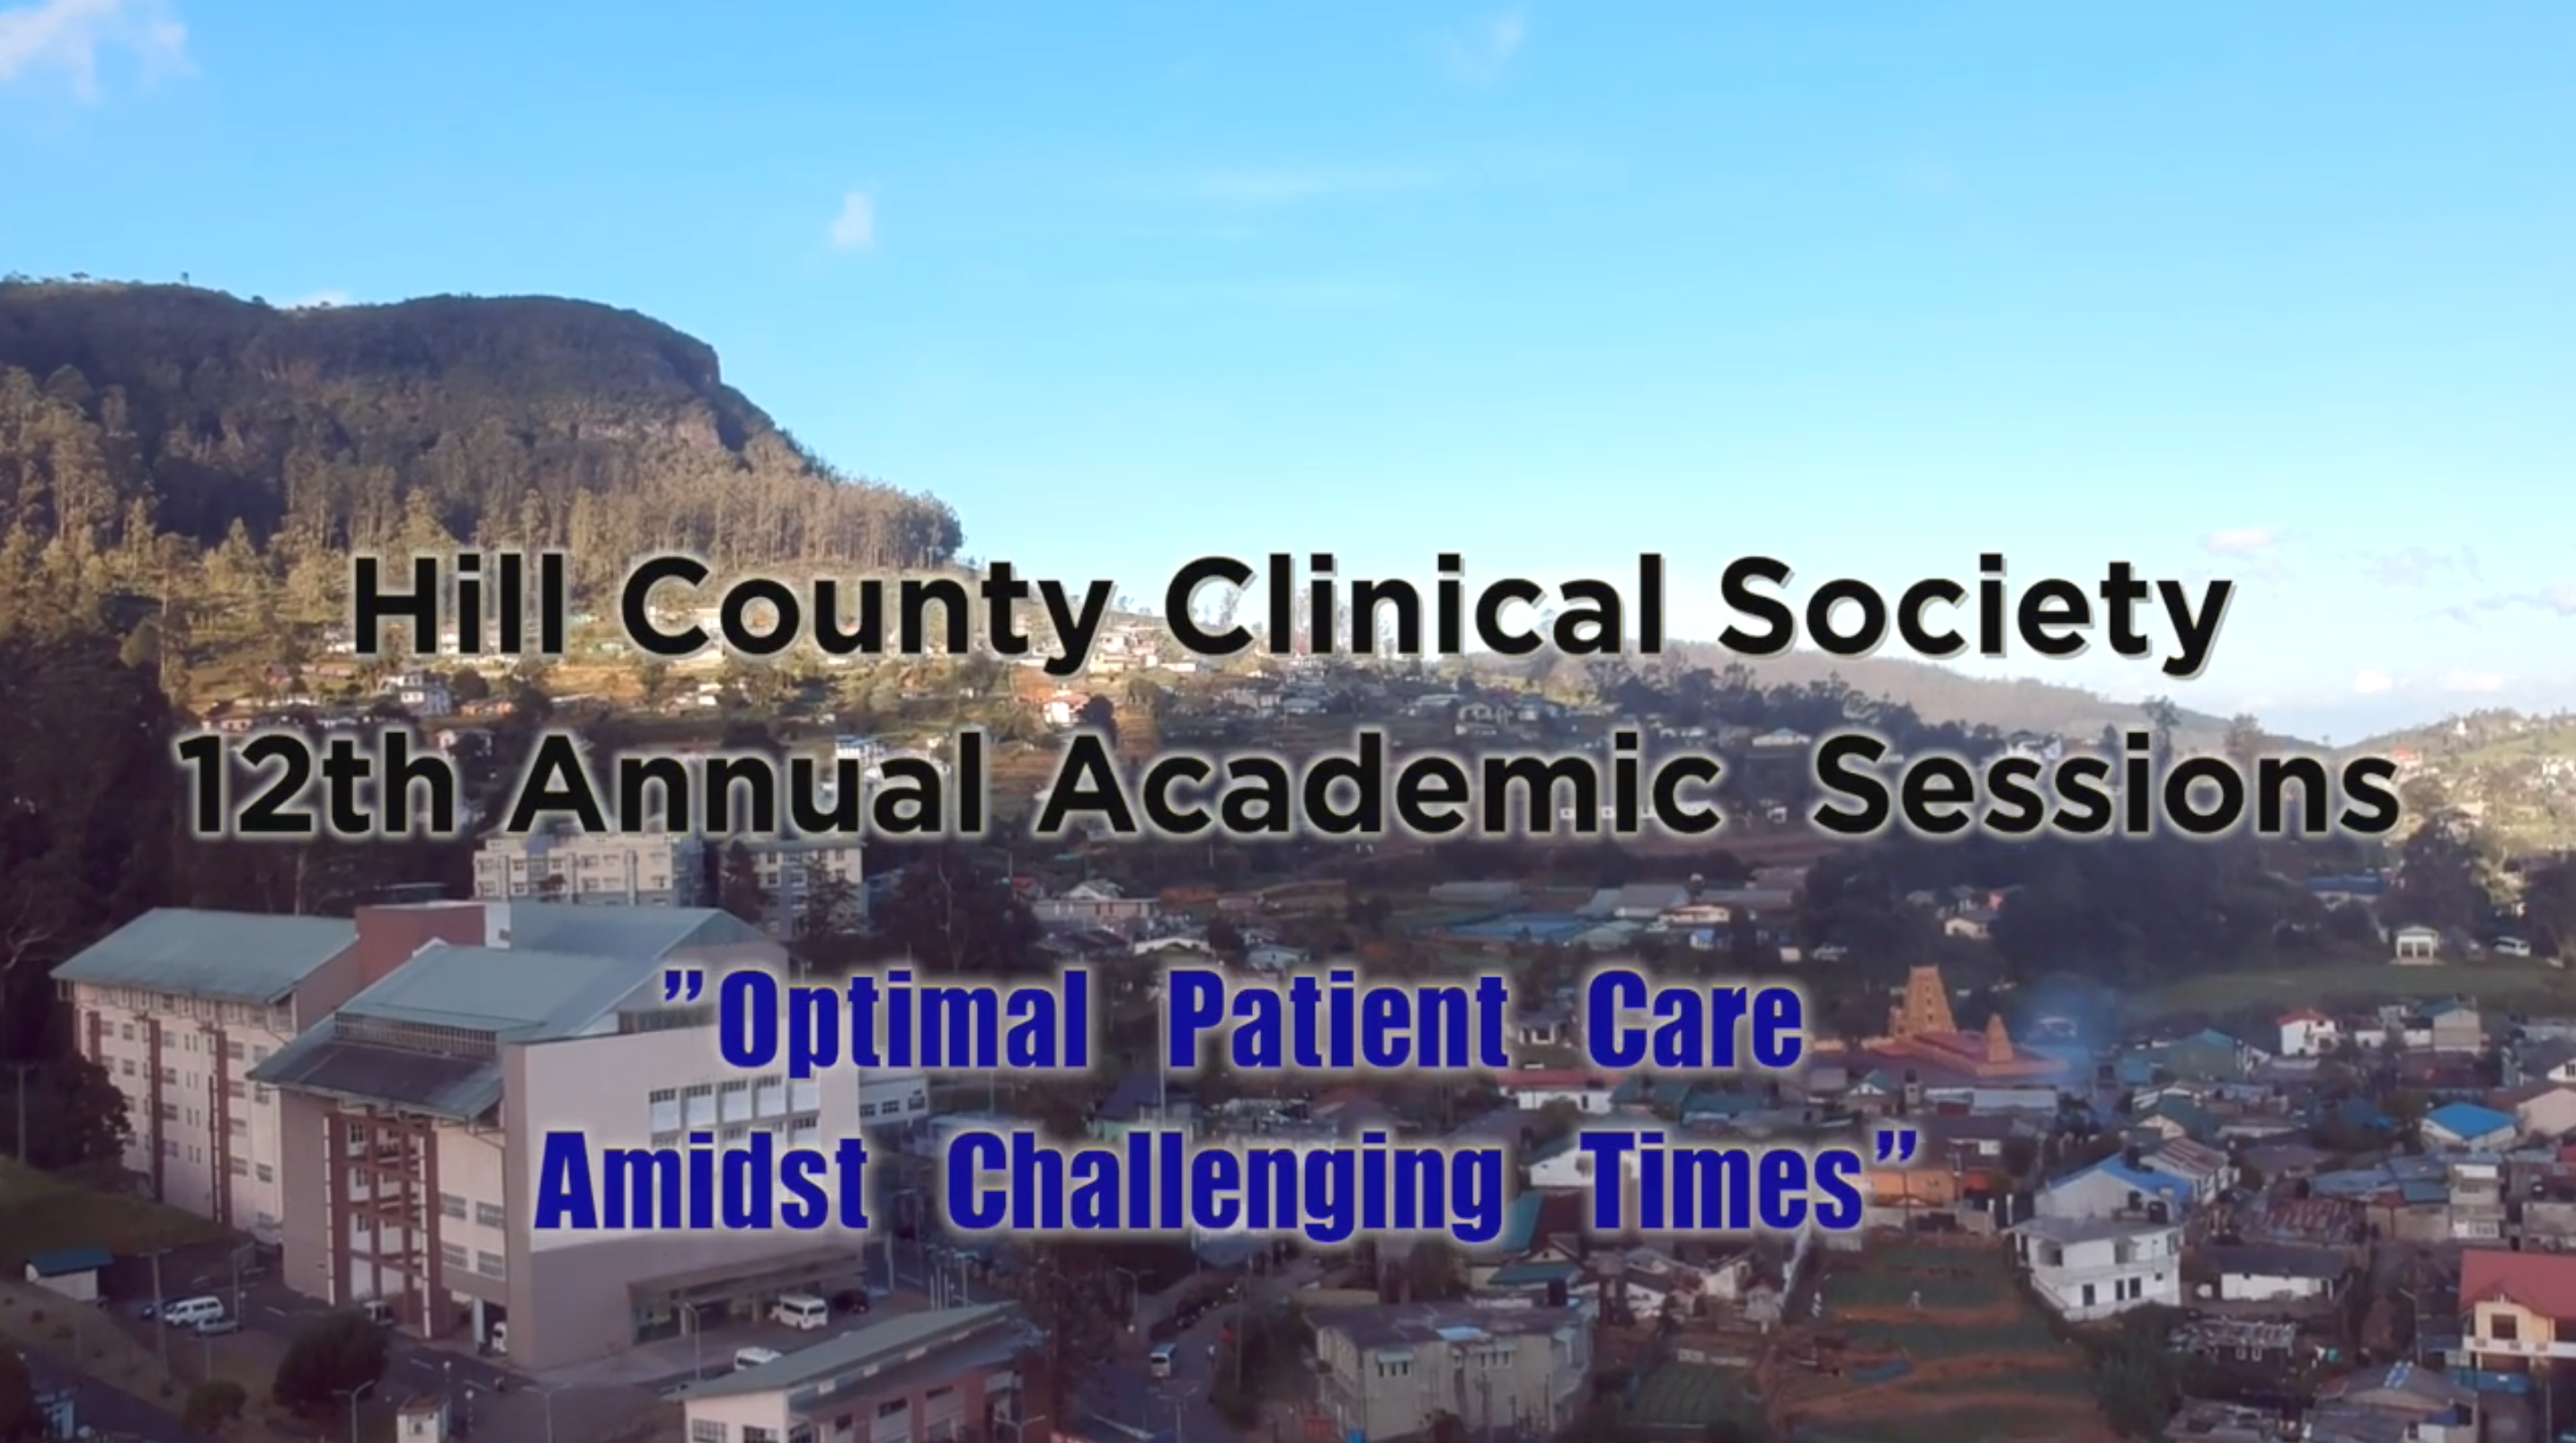 Hill Country Clinical Society 12th Annual Academic Sessions 2023